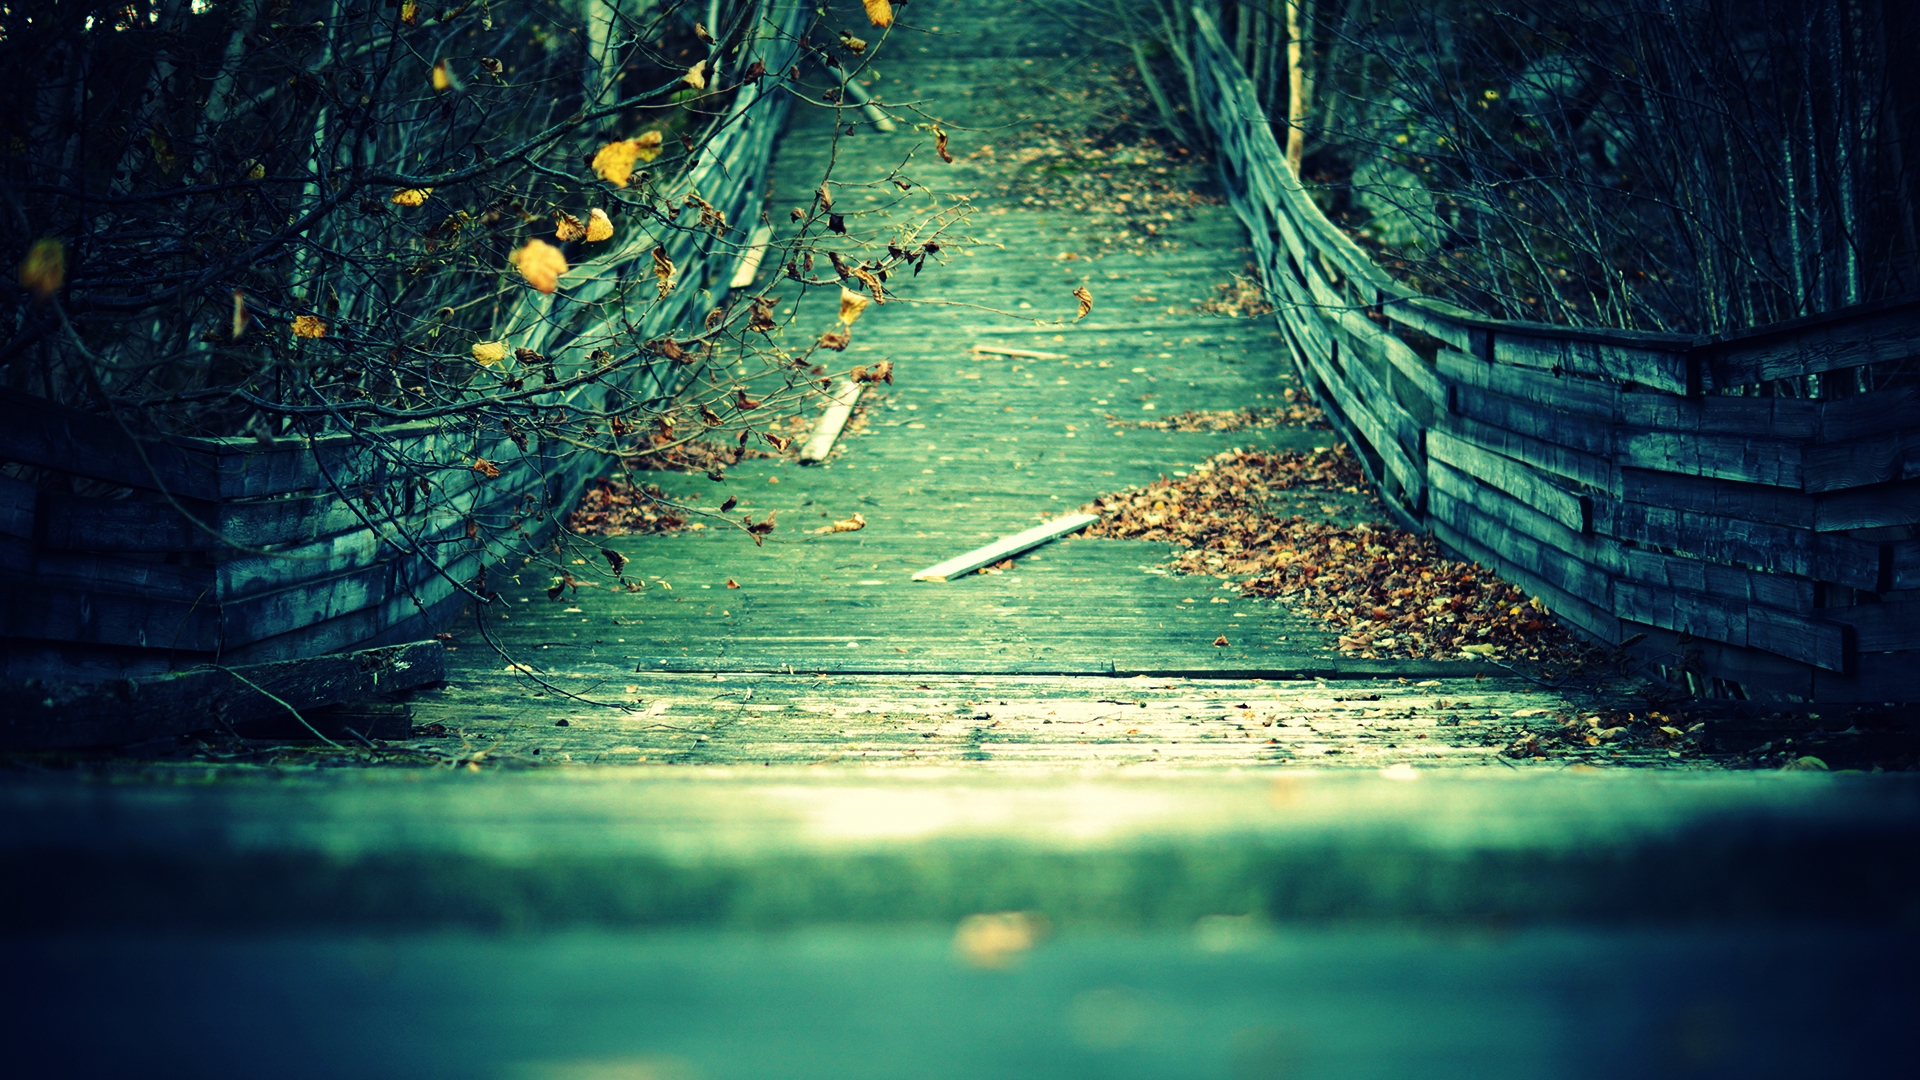 The Old Wooden Bridge With Yellow Foliage HD Desktop Wallpaper